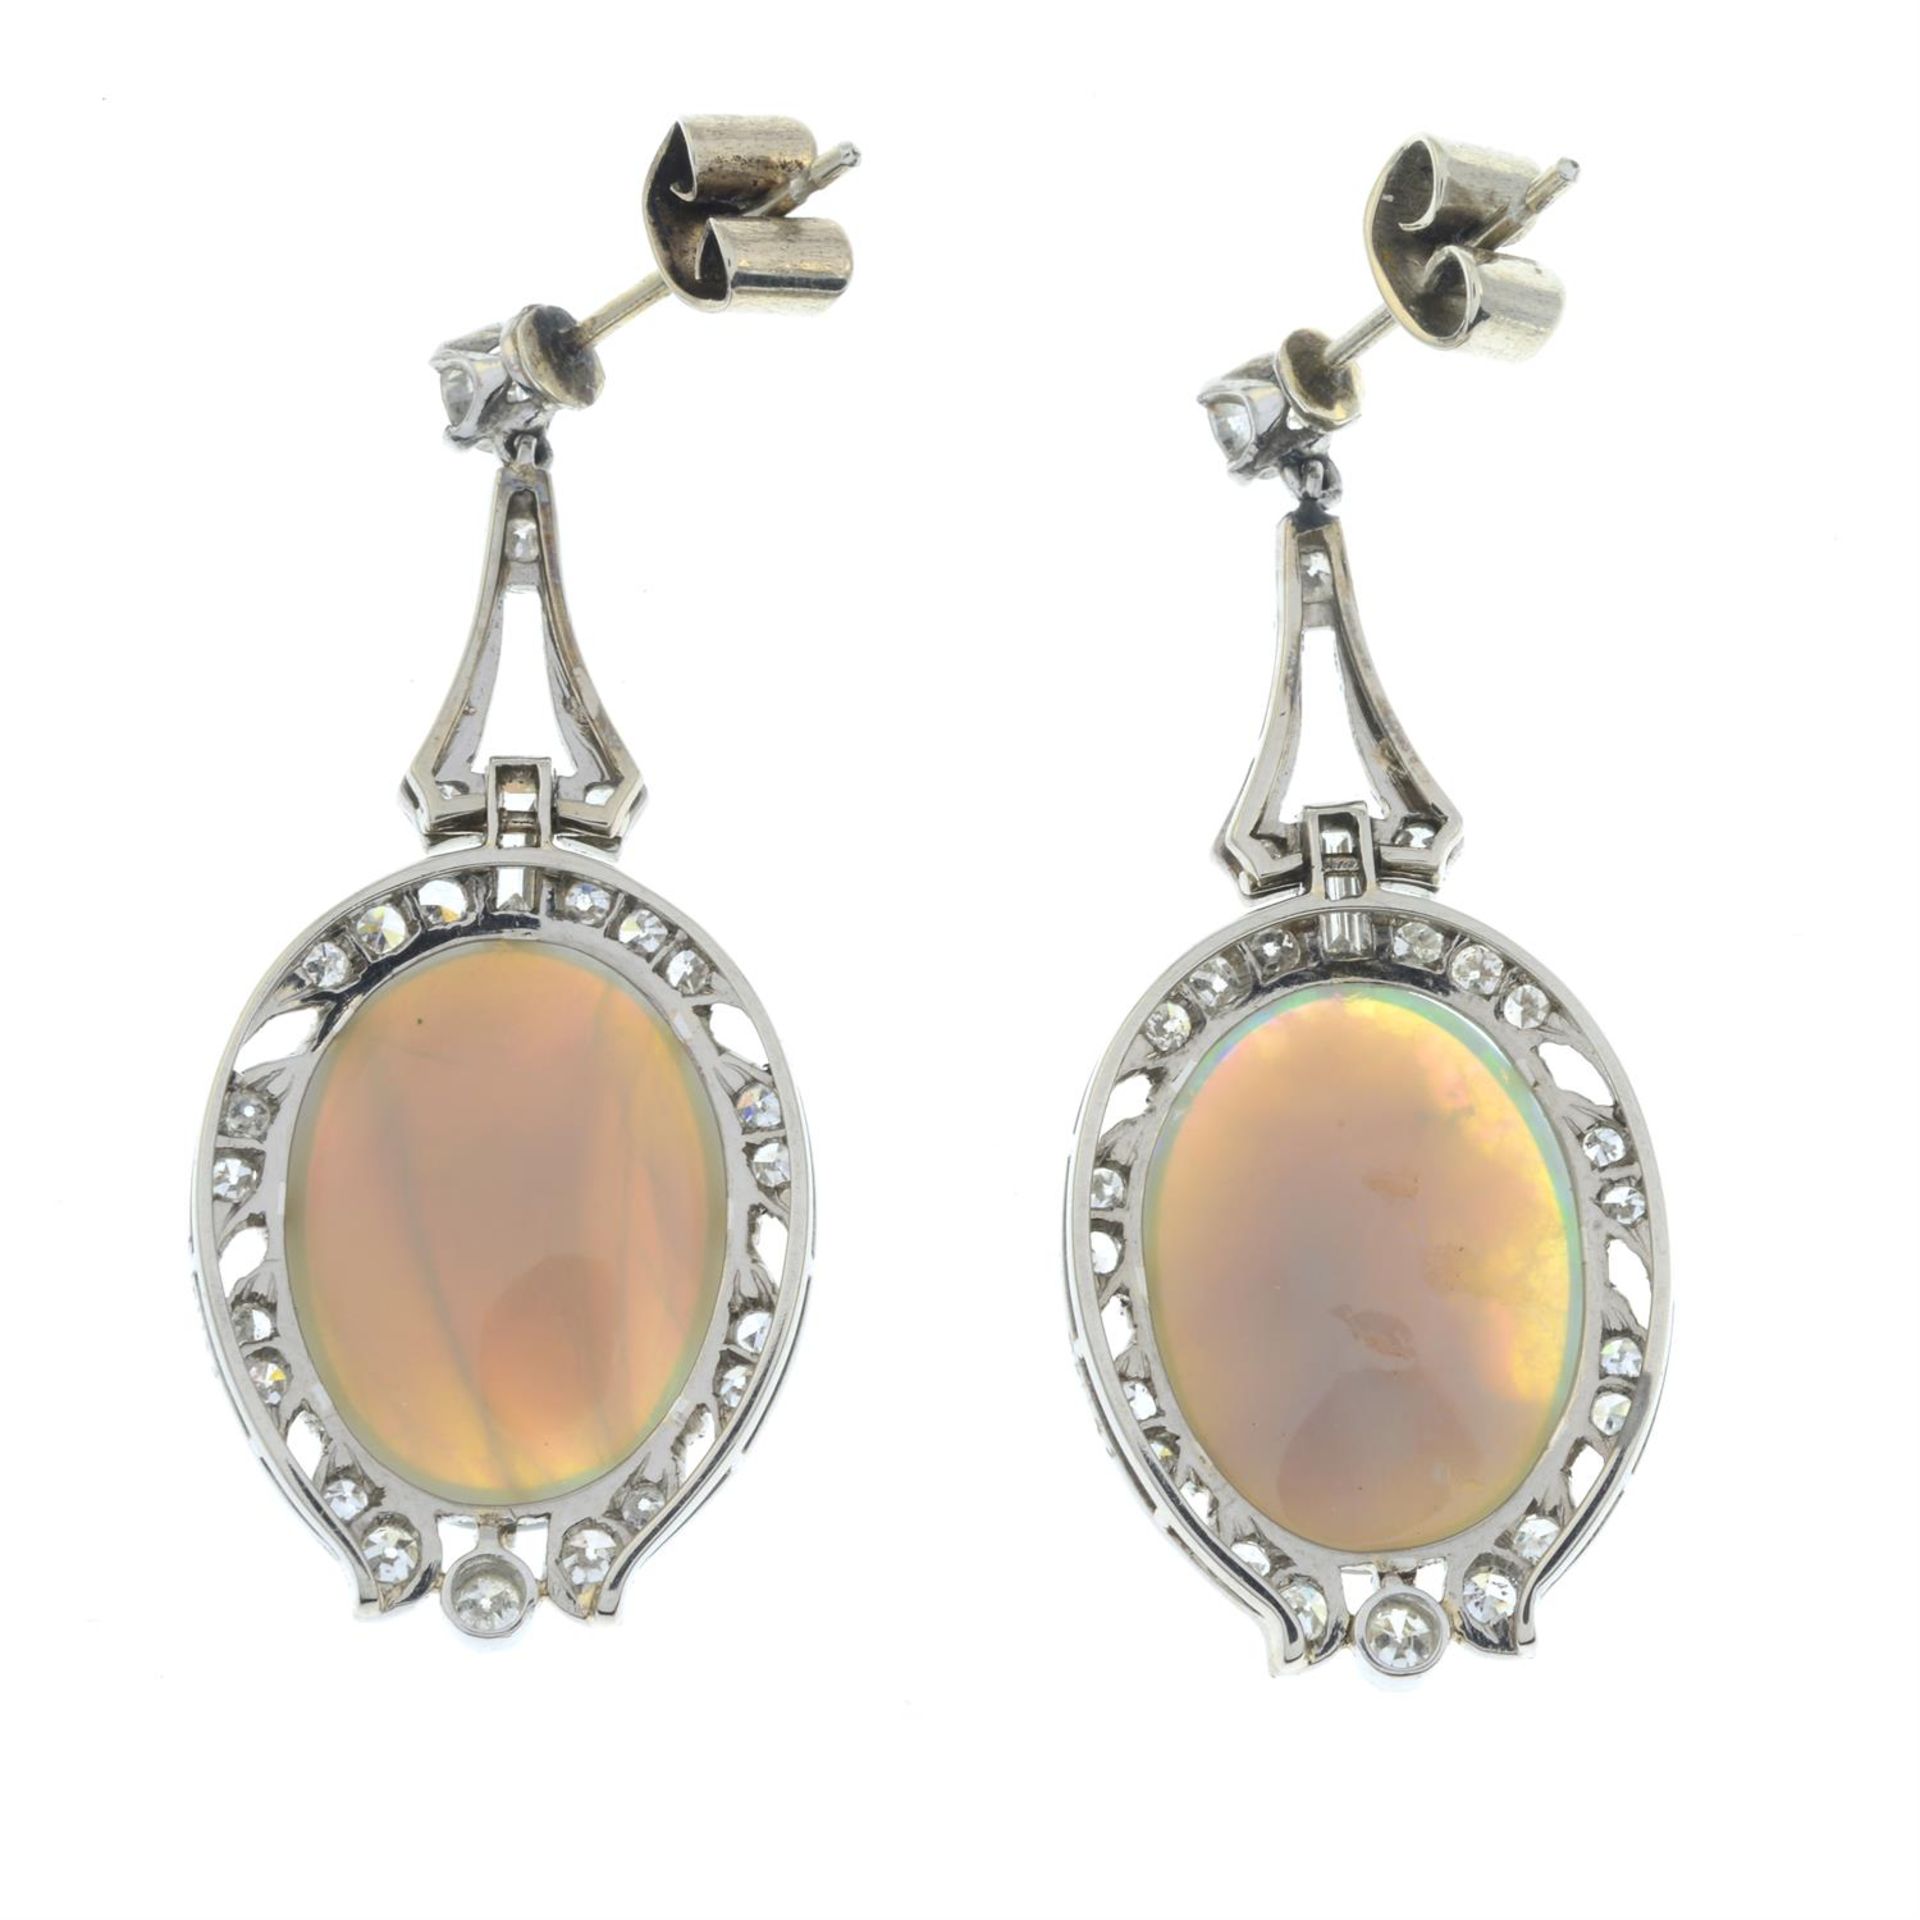 A pair of early 20th century platinum and 18ct gold opal and vari-cut diamond earrings. - Image 3 of 5